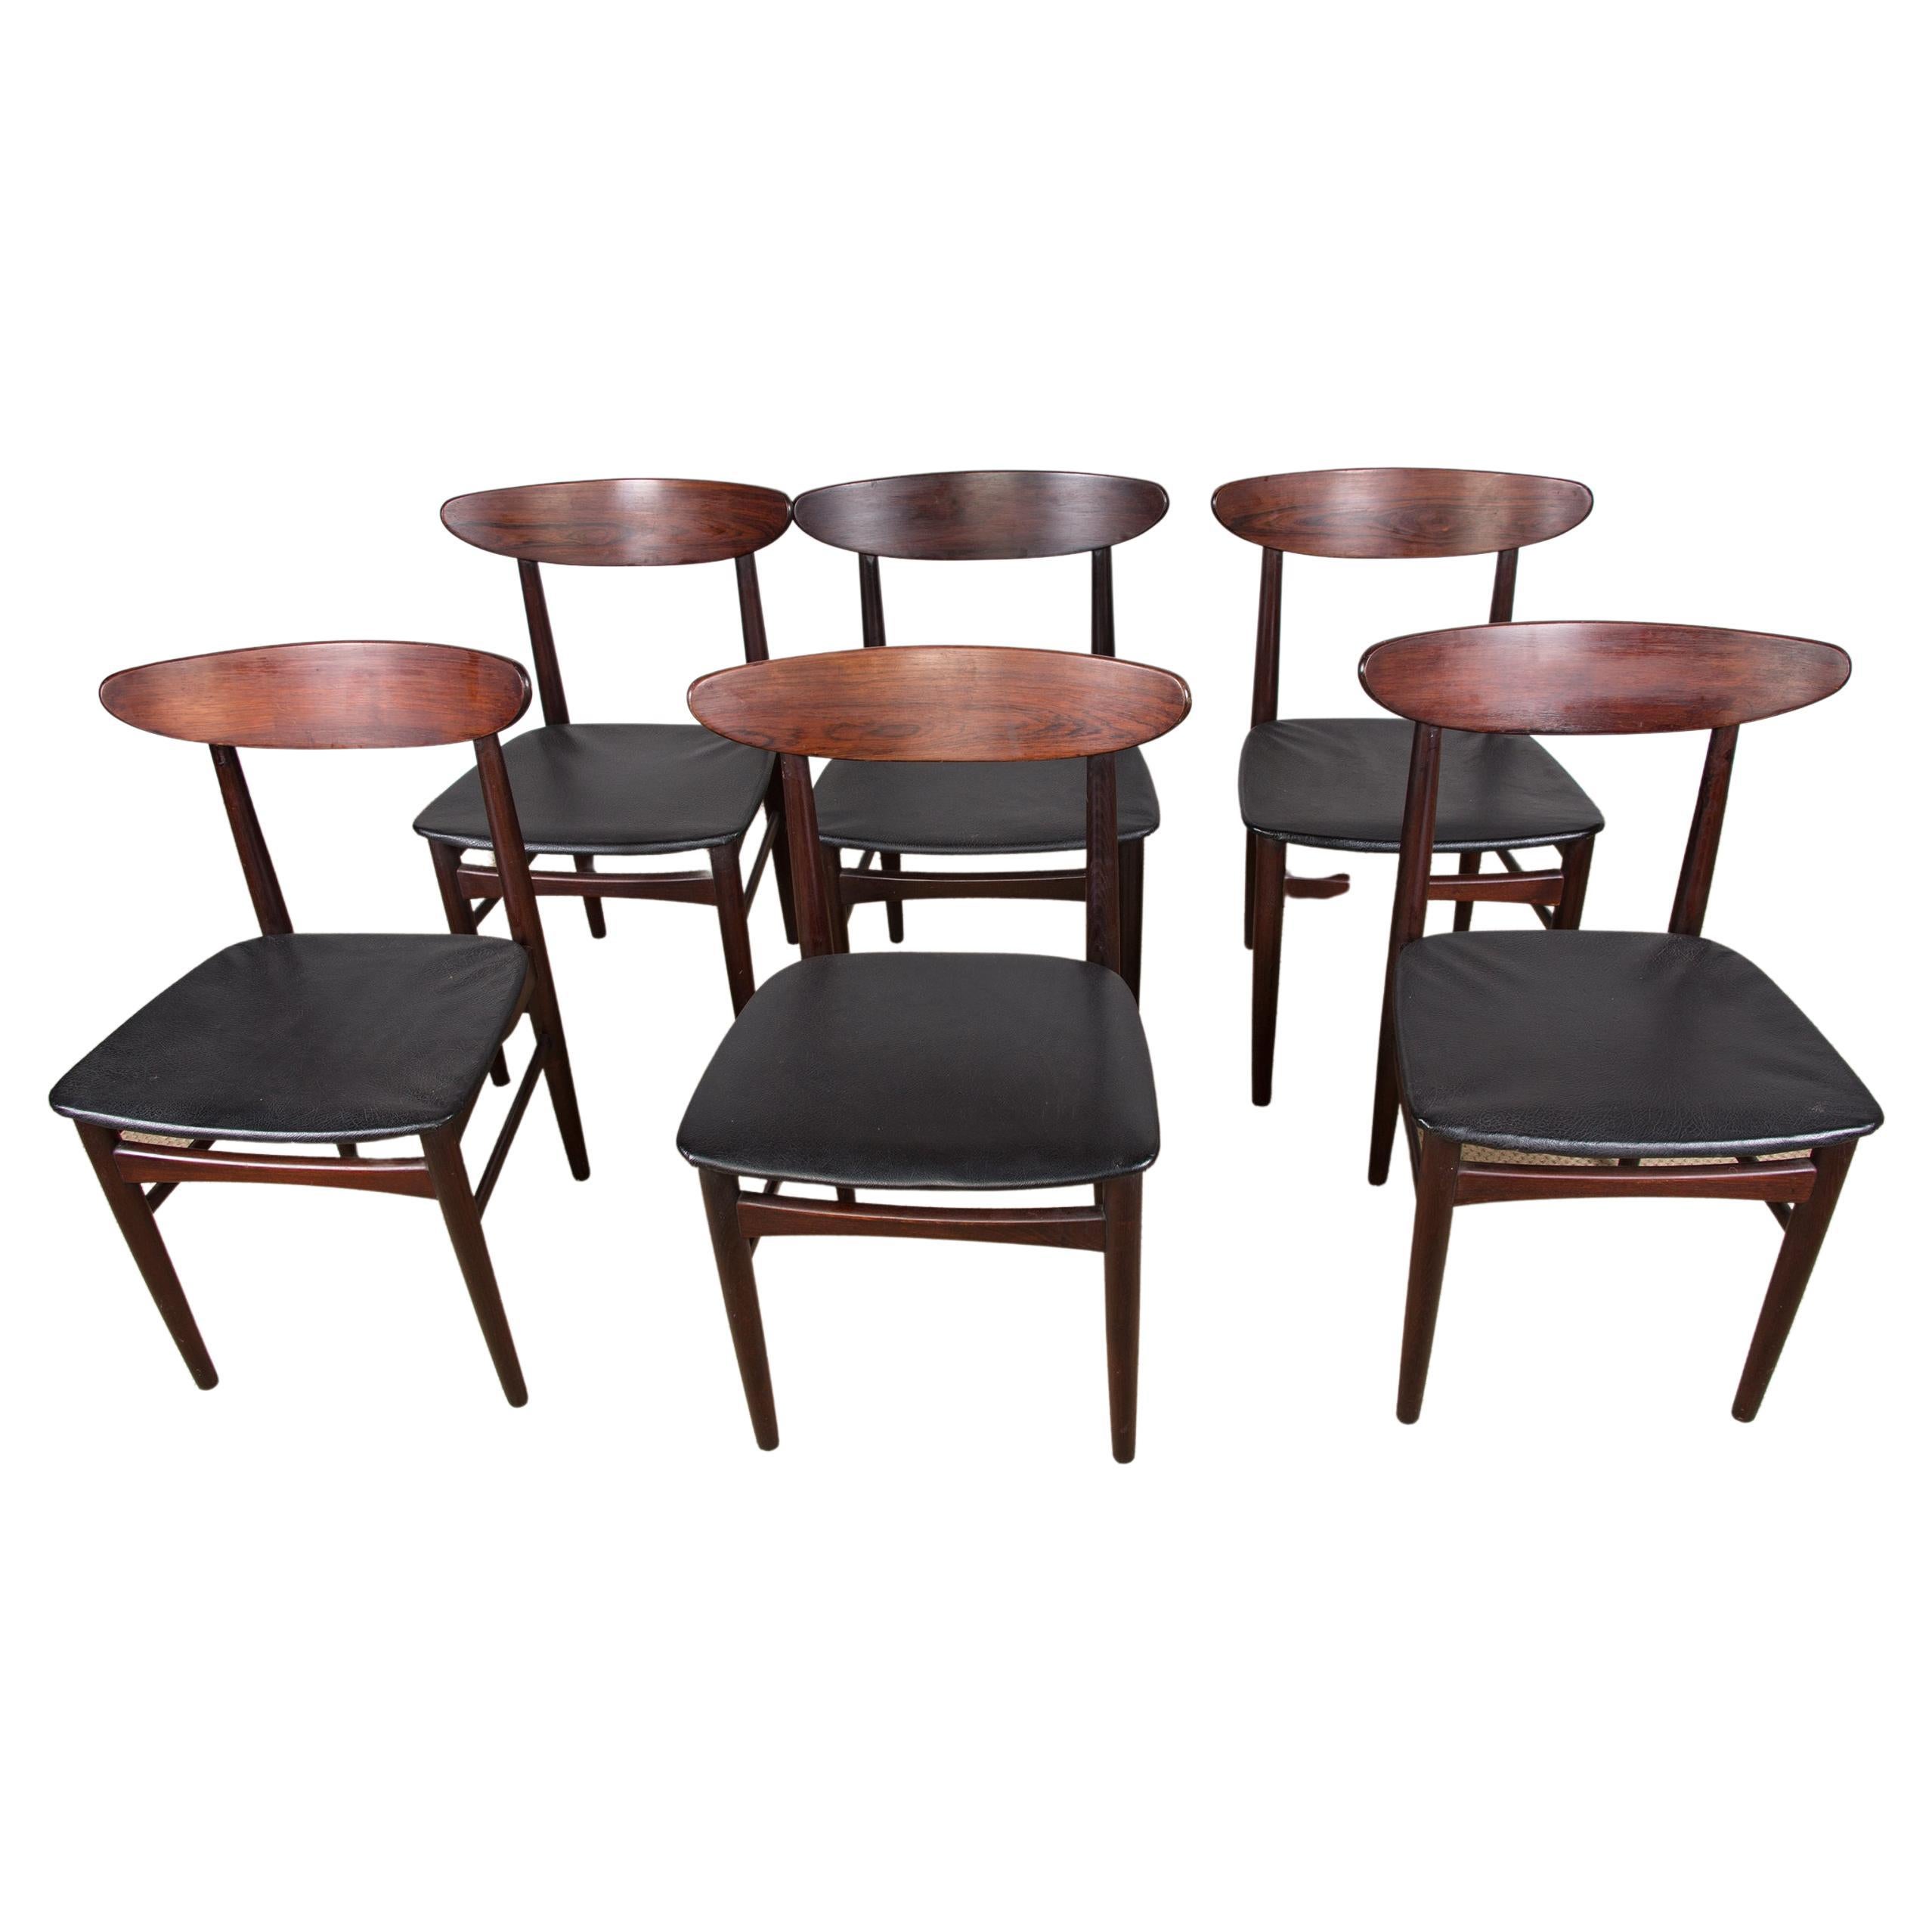 Series of 6 Danish Chairs in Rosewood and Skai by Dyrlund, 1960